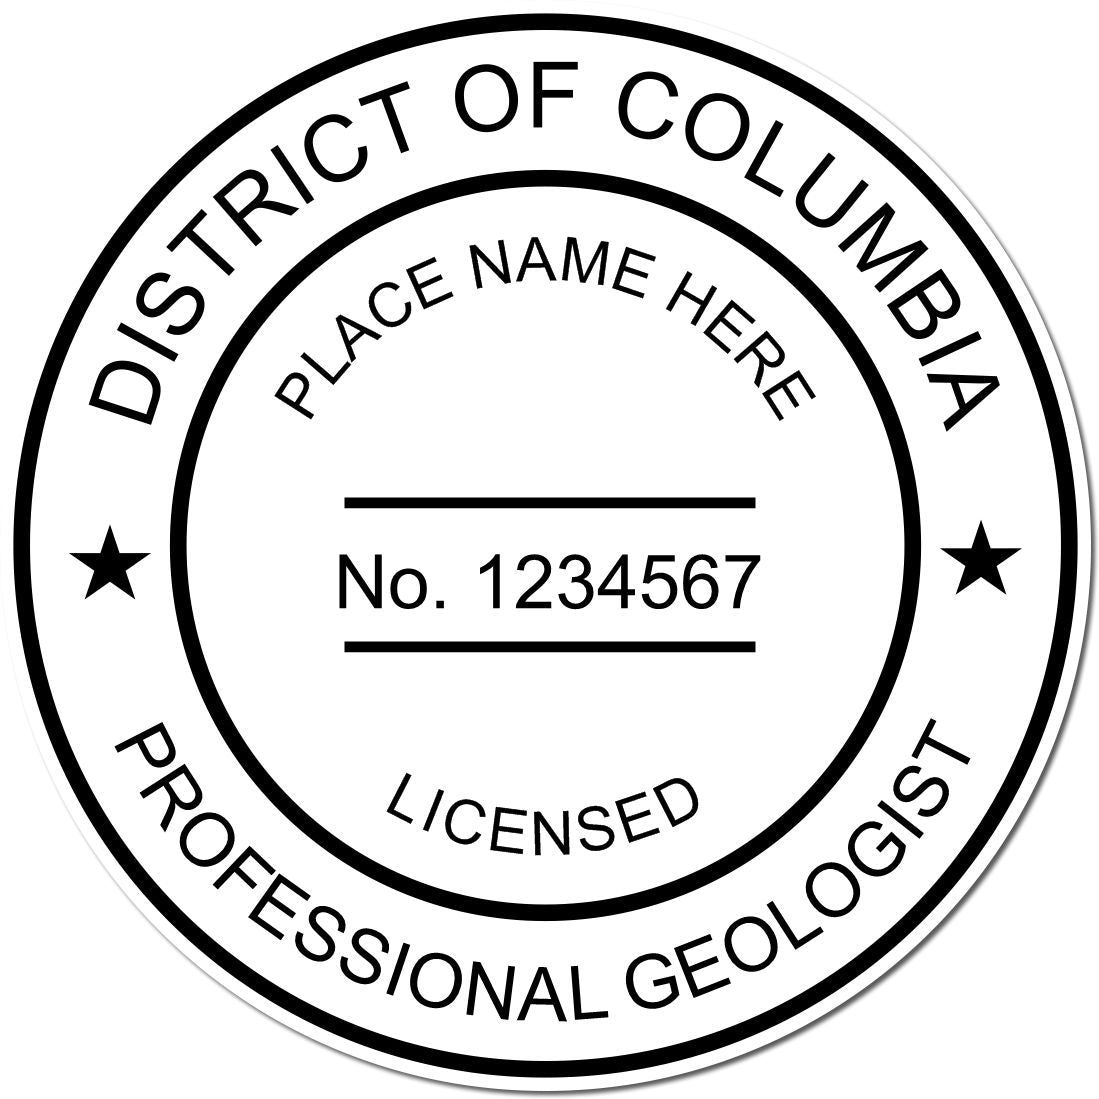 This paper is stamped with a sample imprint of the District of Columbia Professional Geologist Seal Stamp, signifying its quality and reliability.